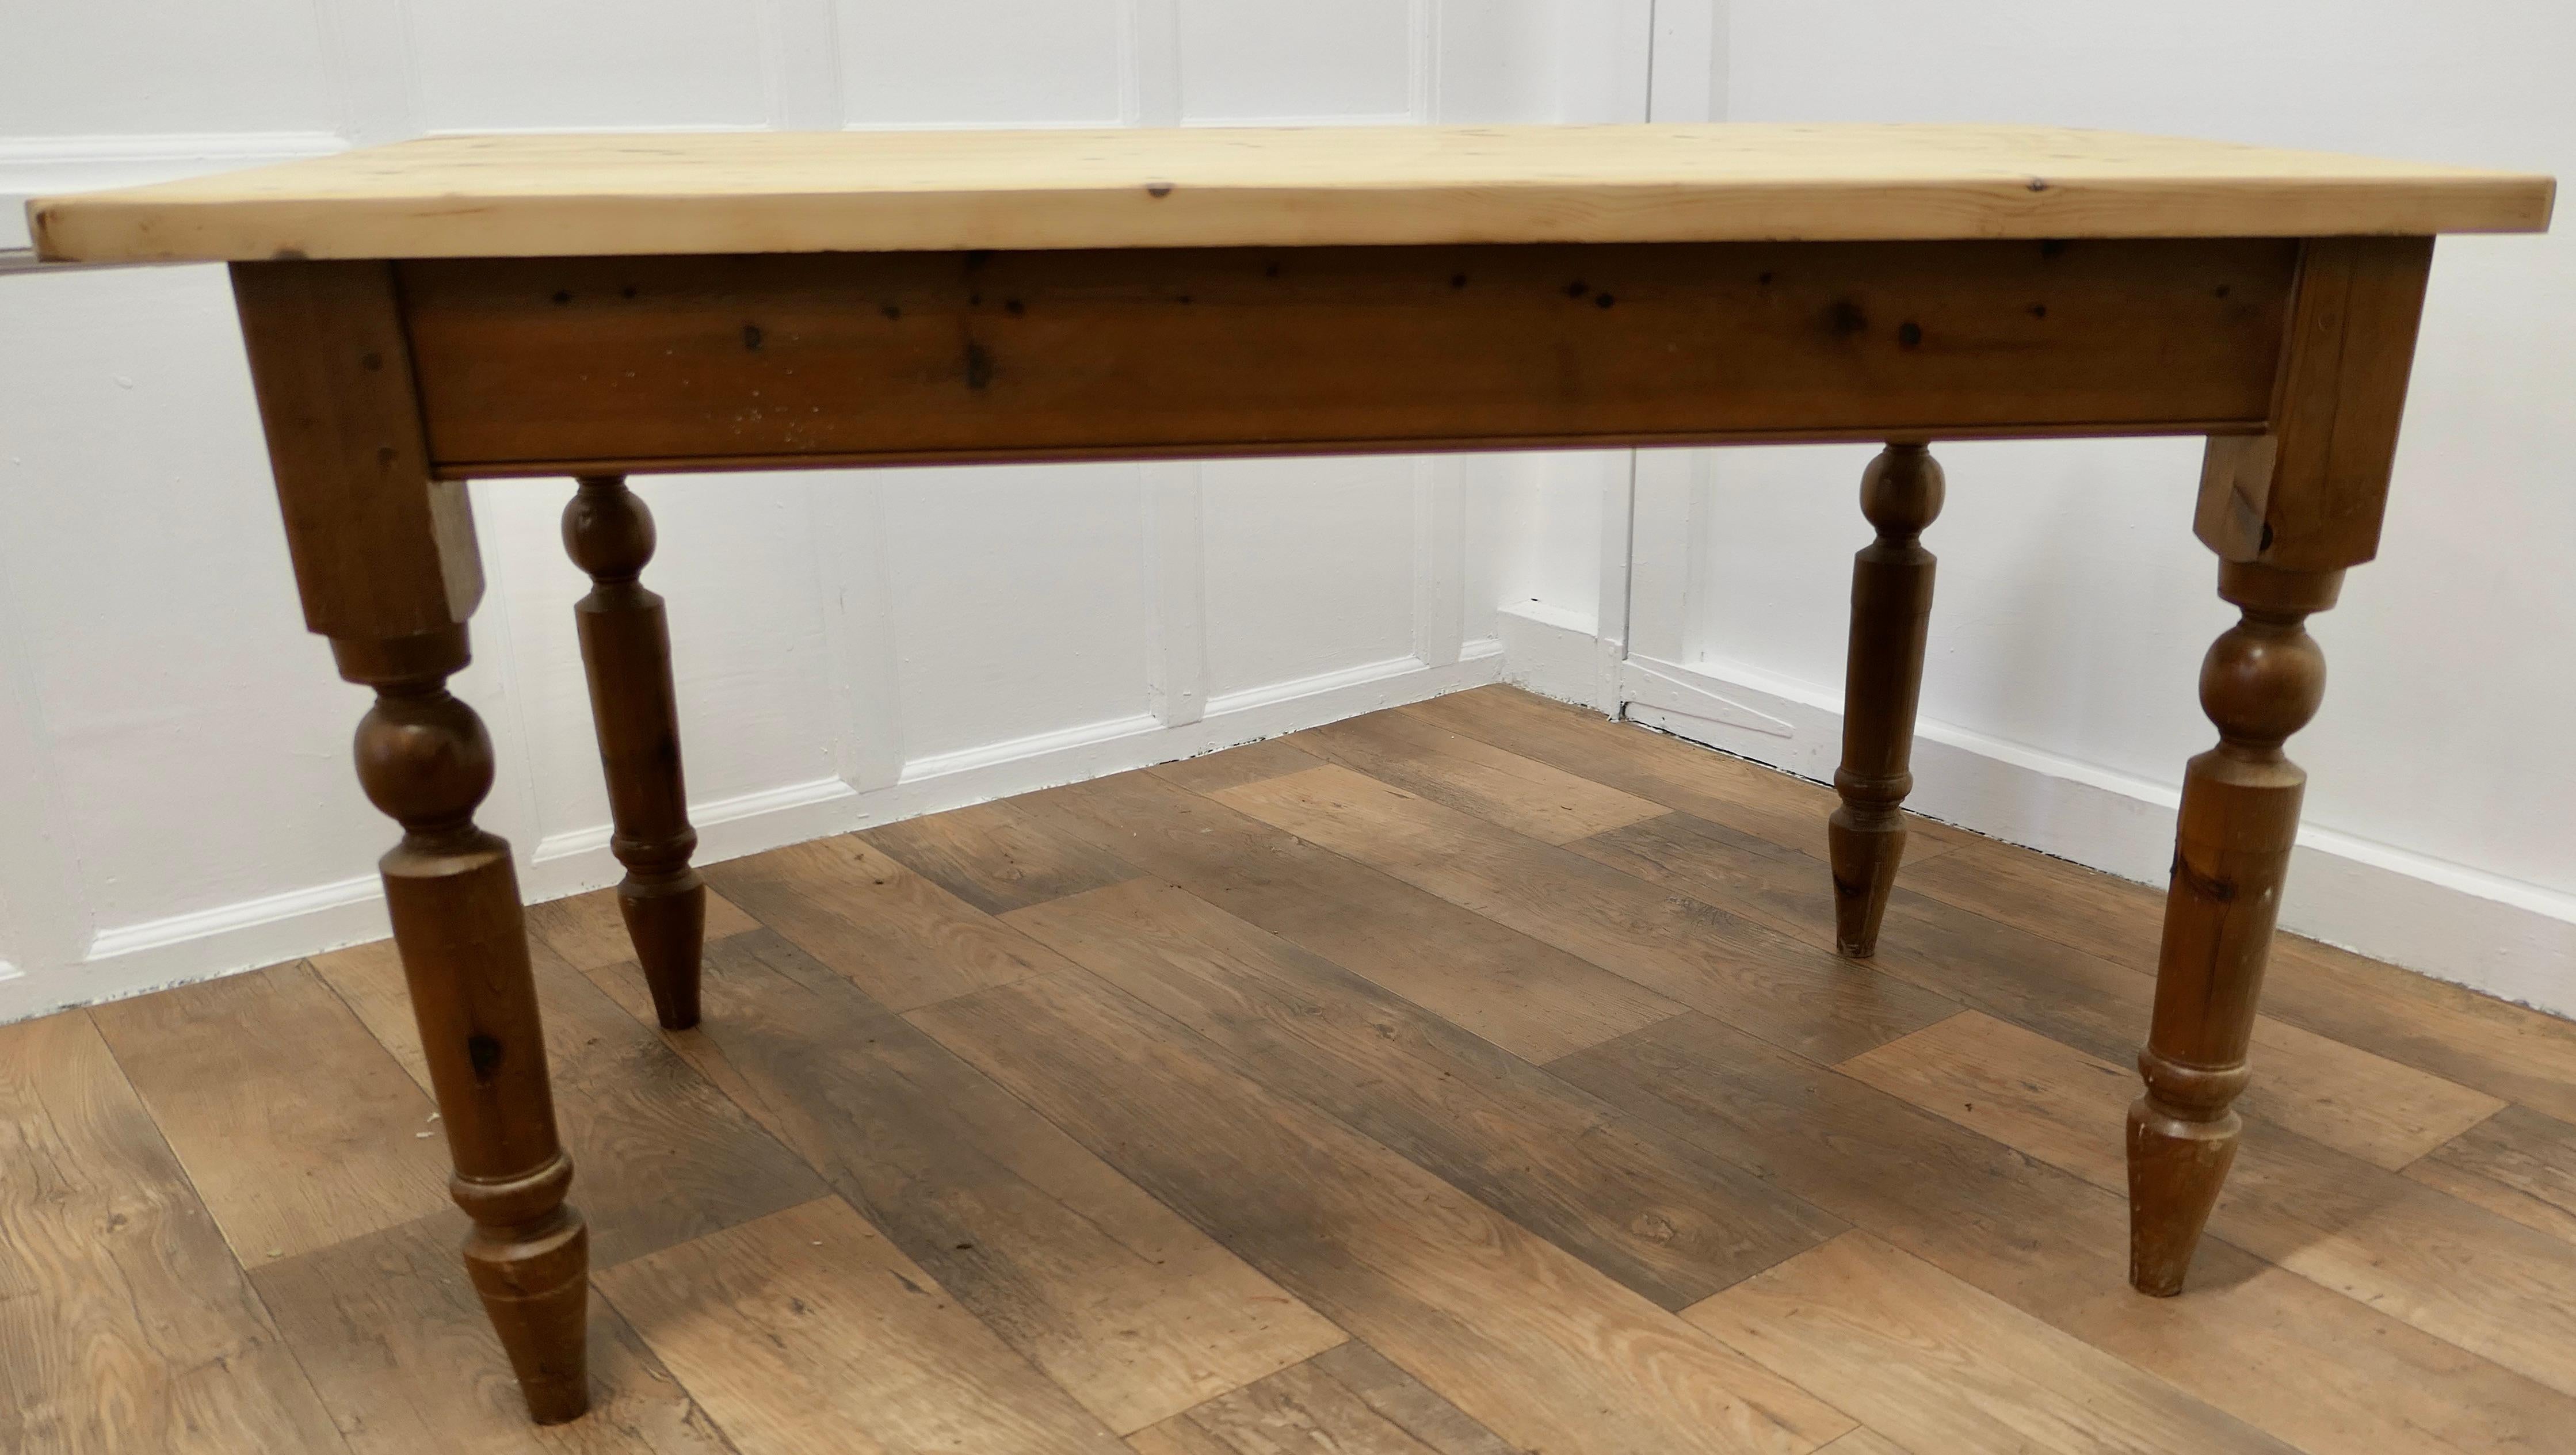 Pine Scrub Top Farmhouse Kitchen Table

 This good Traditional table has a cleaned up plank scrub top, this has been left in its bleached finish. The turned legs are age darkened and have a lovely natural colour
This is a good size table for a